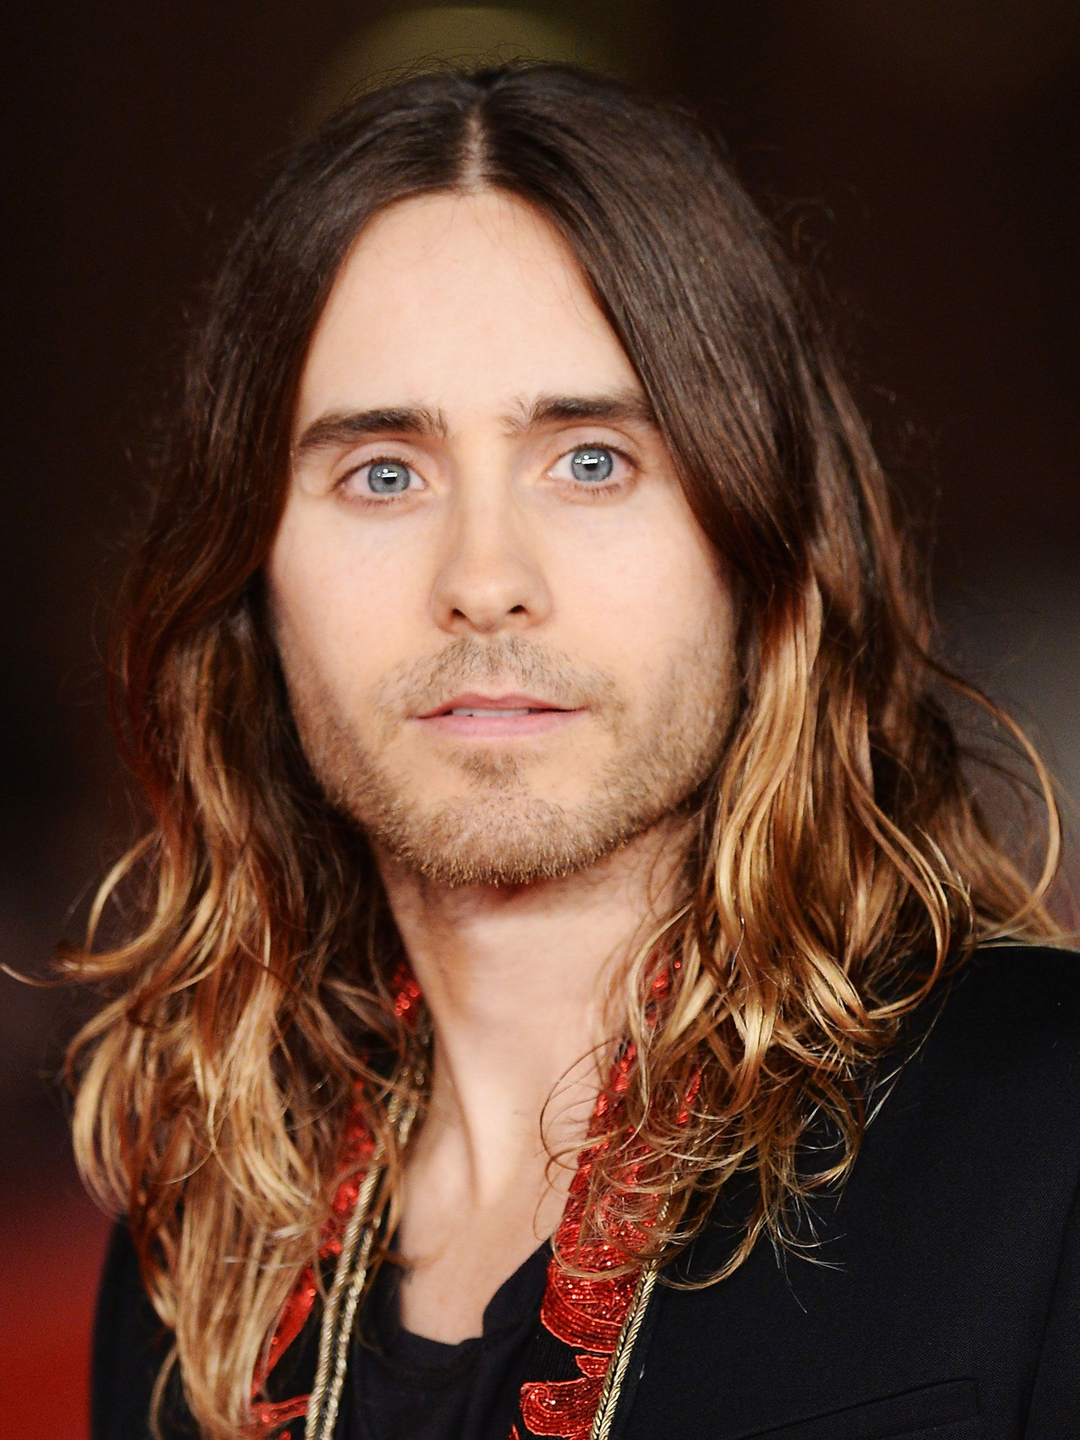 Jared Leto story of success